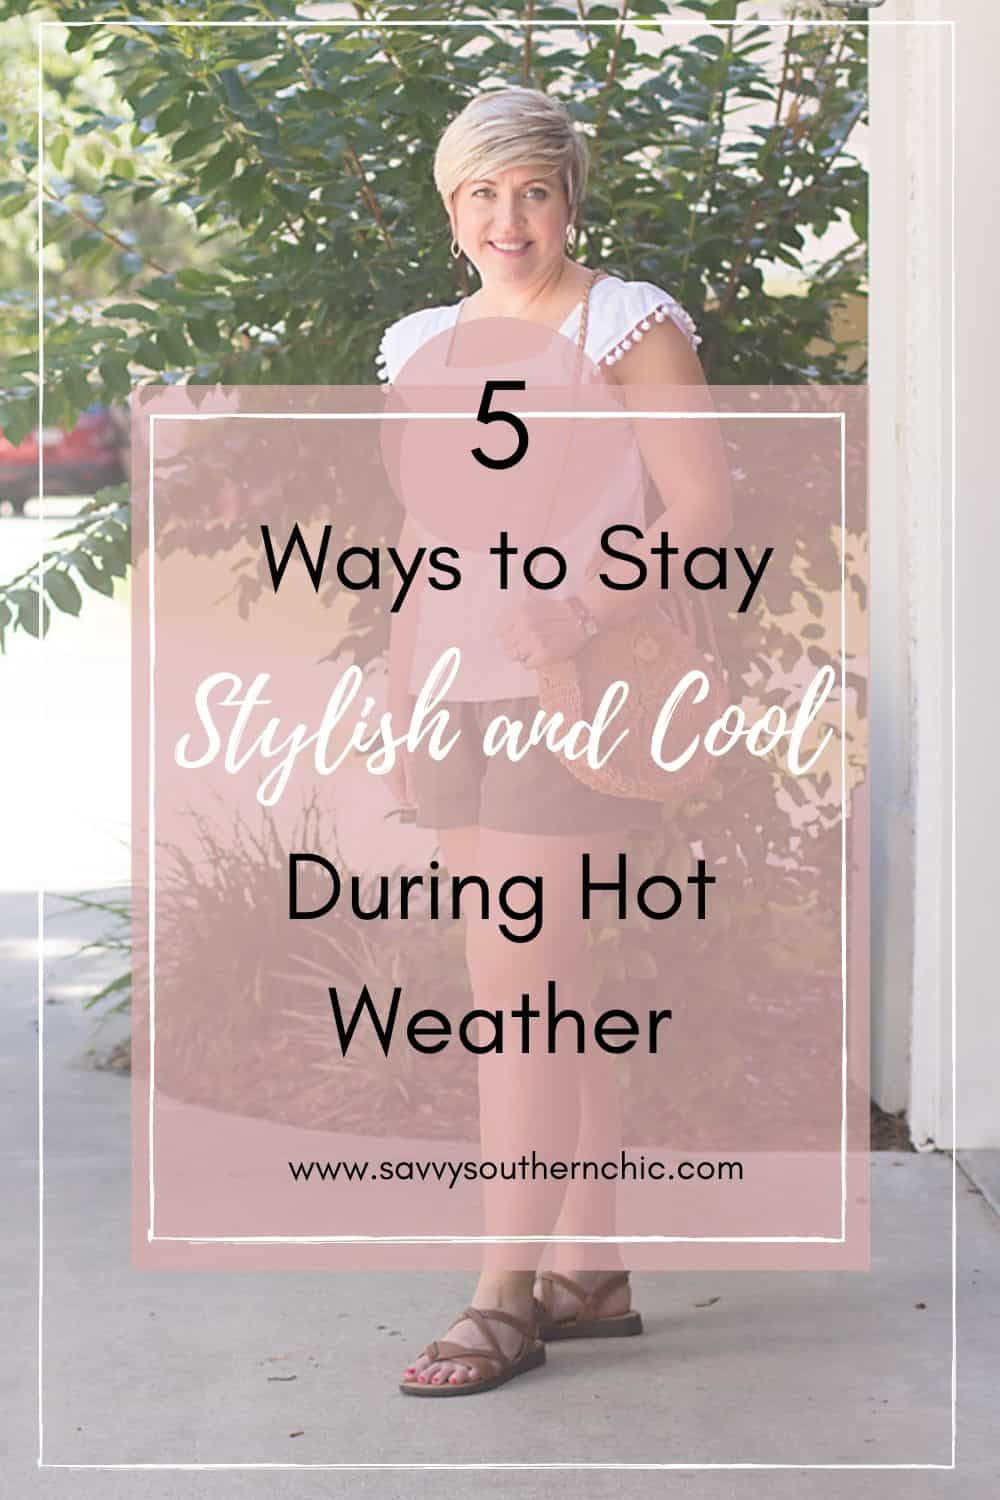 5 ways to stay stylish and cool during hot weather